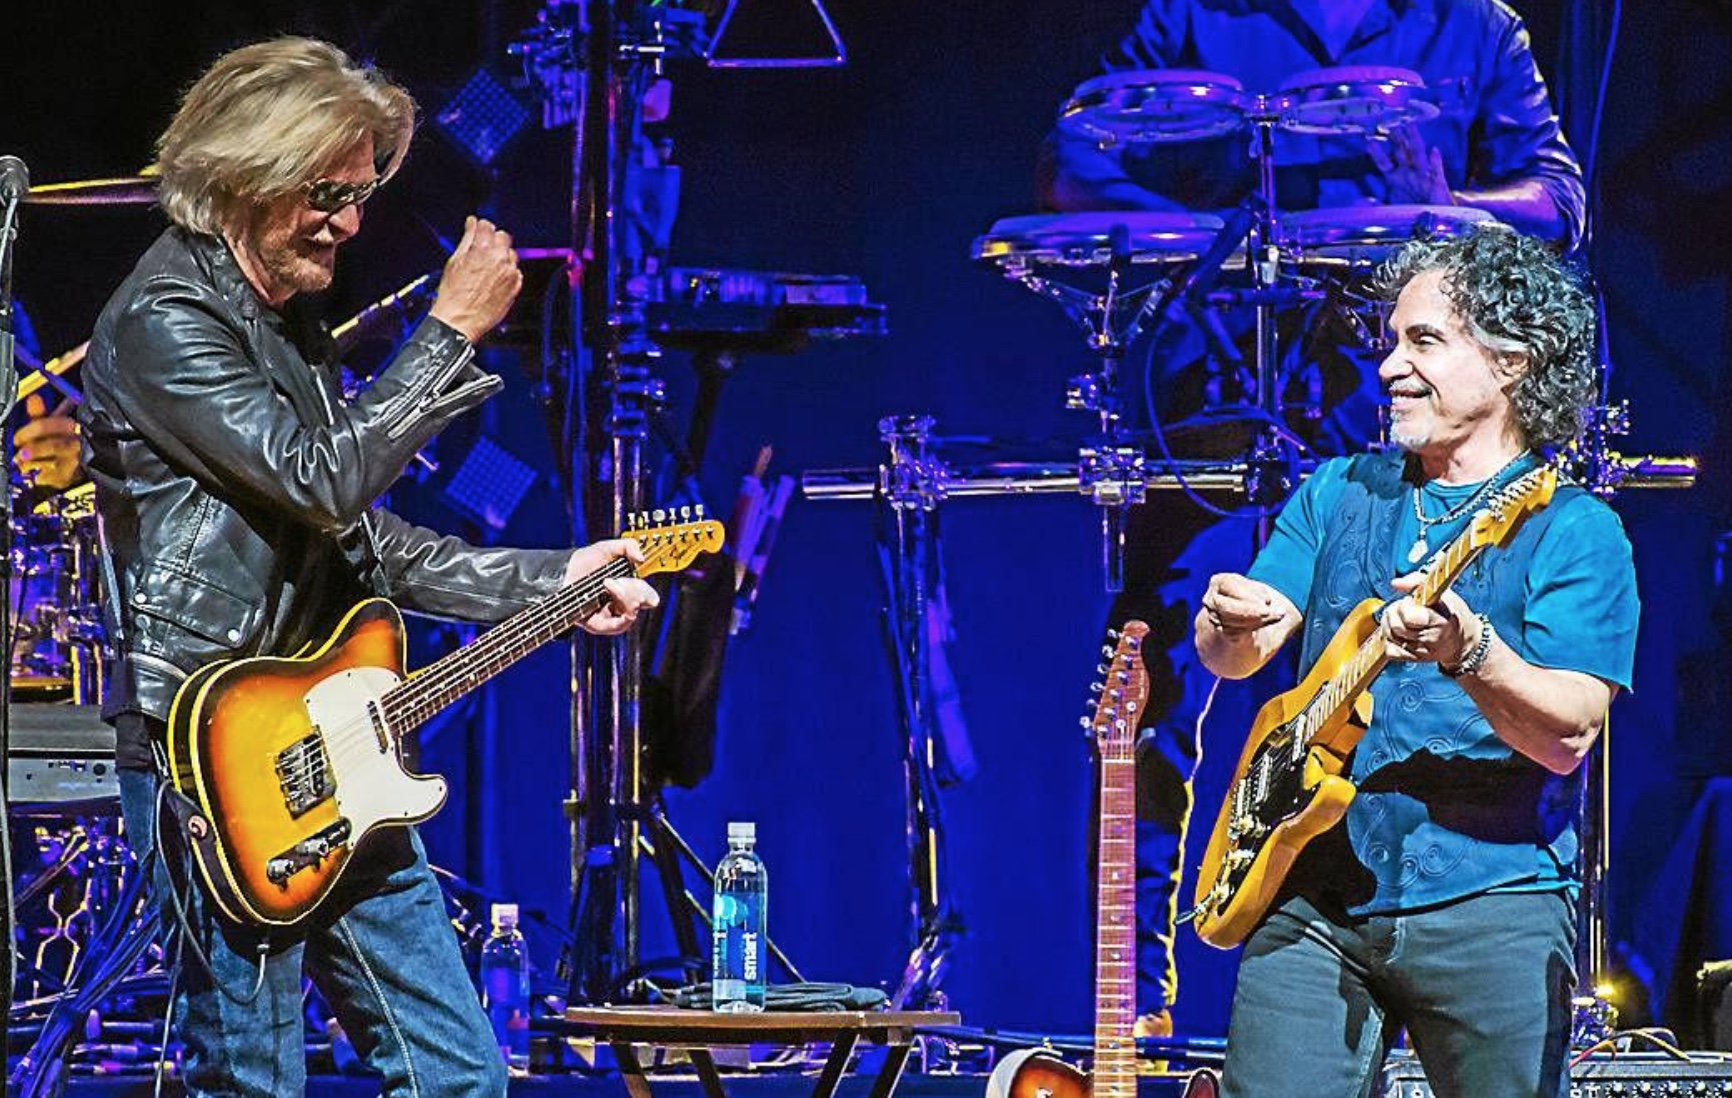 will hall and oates tour together